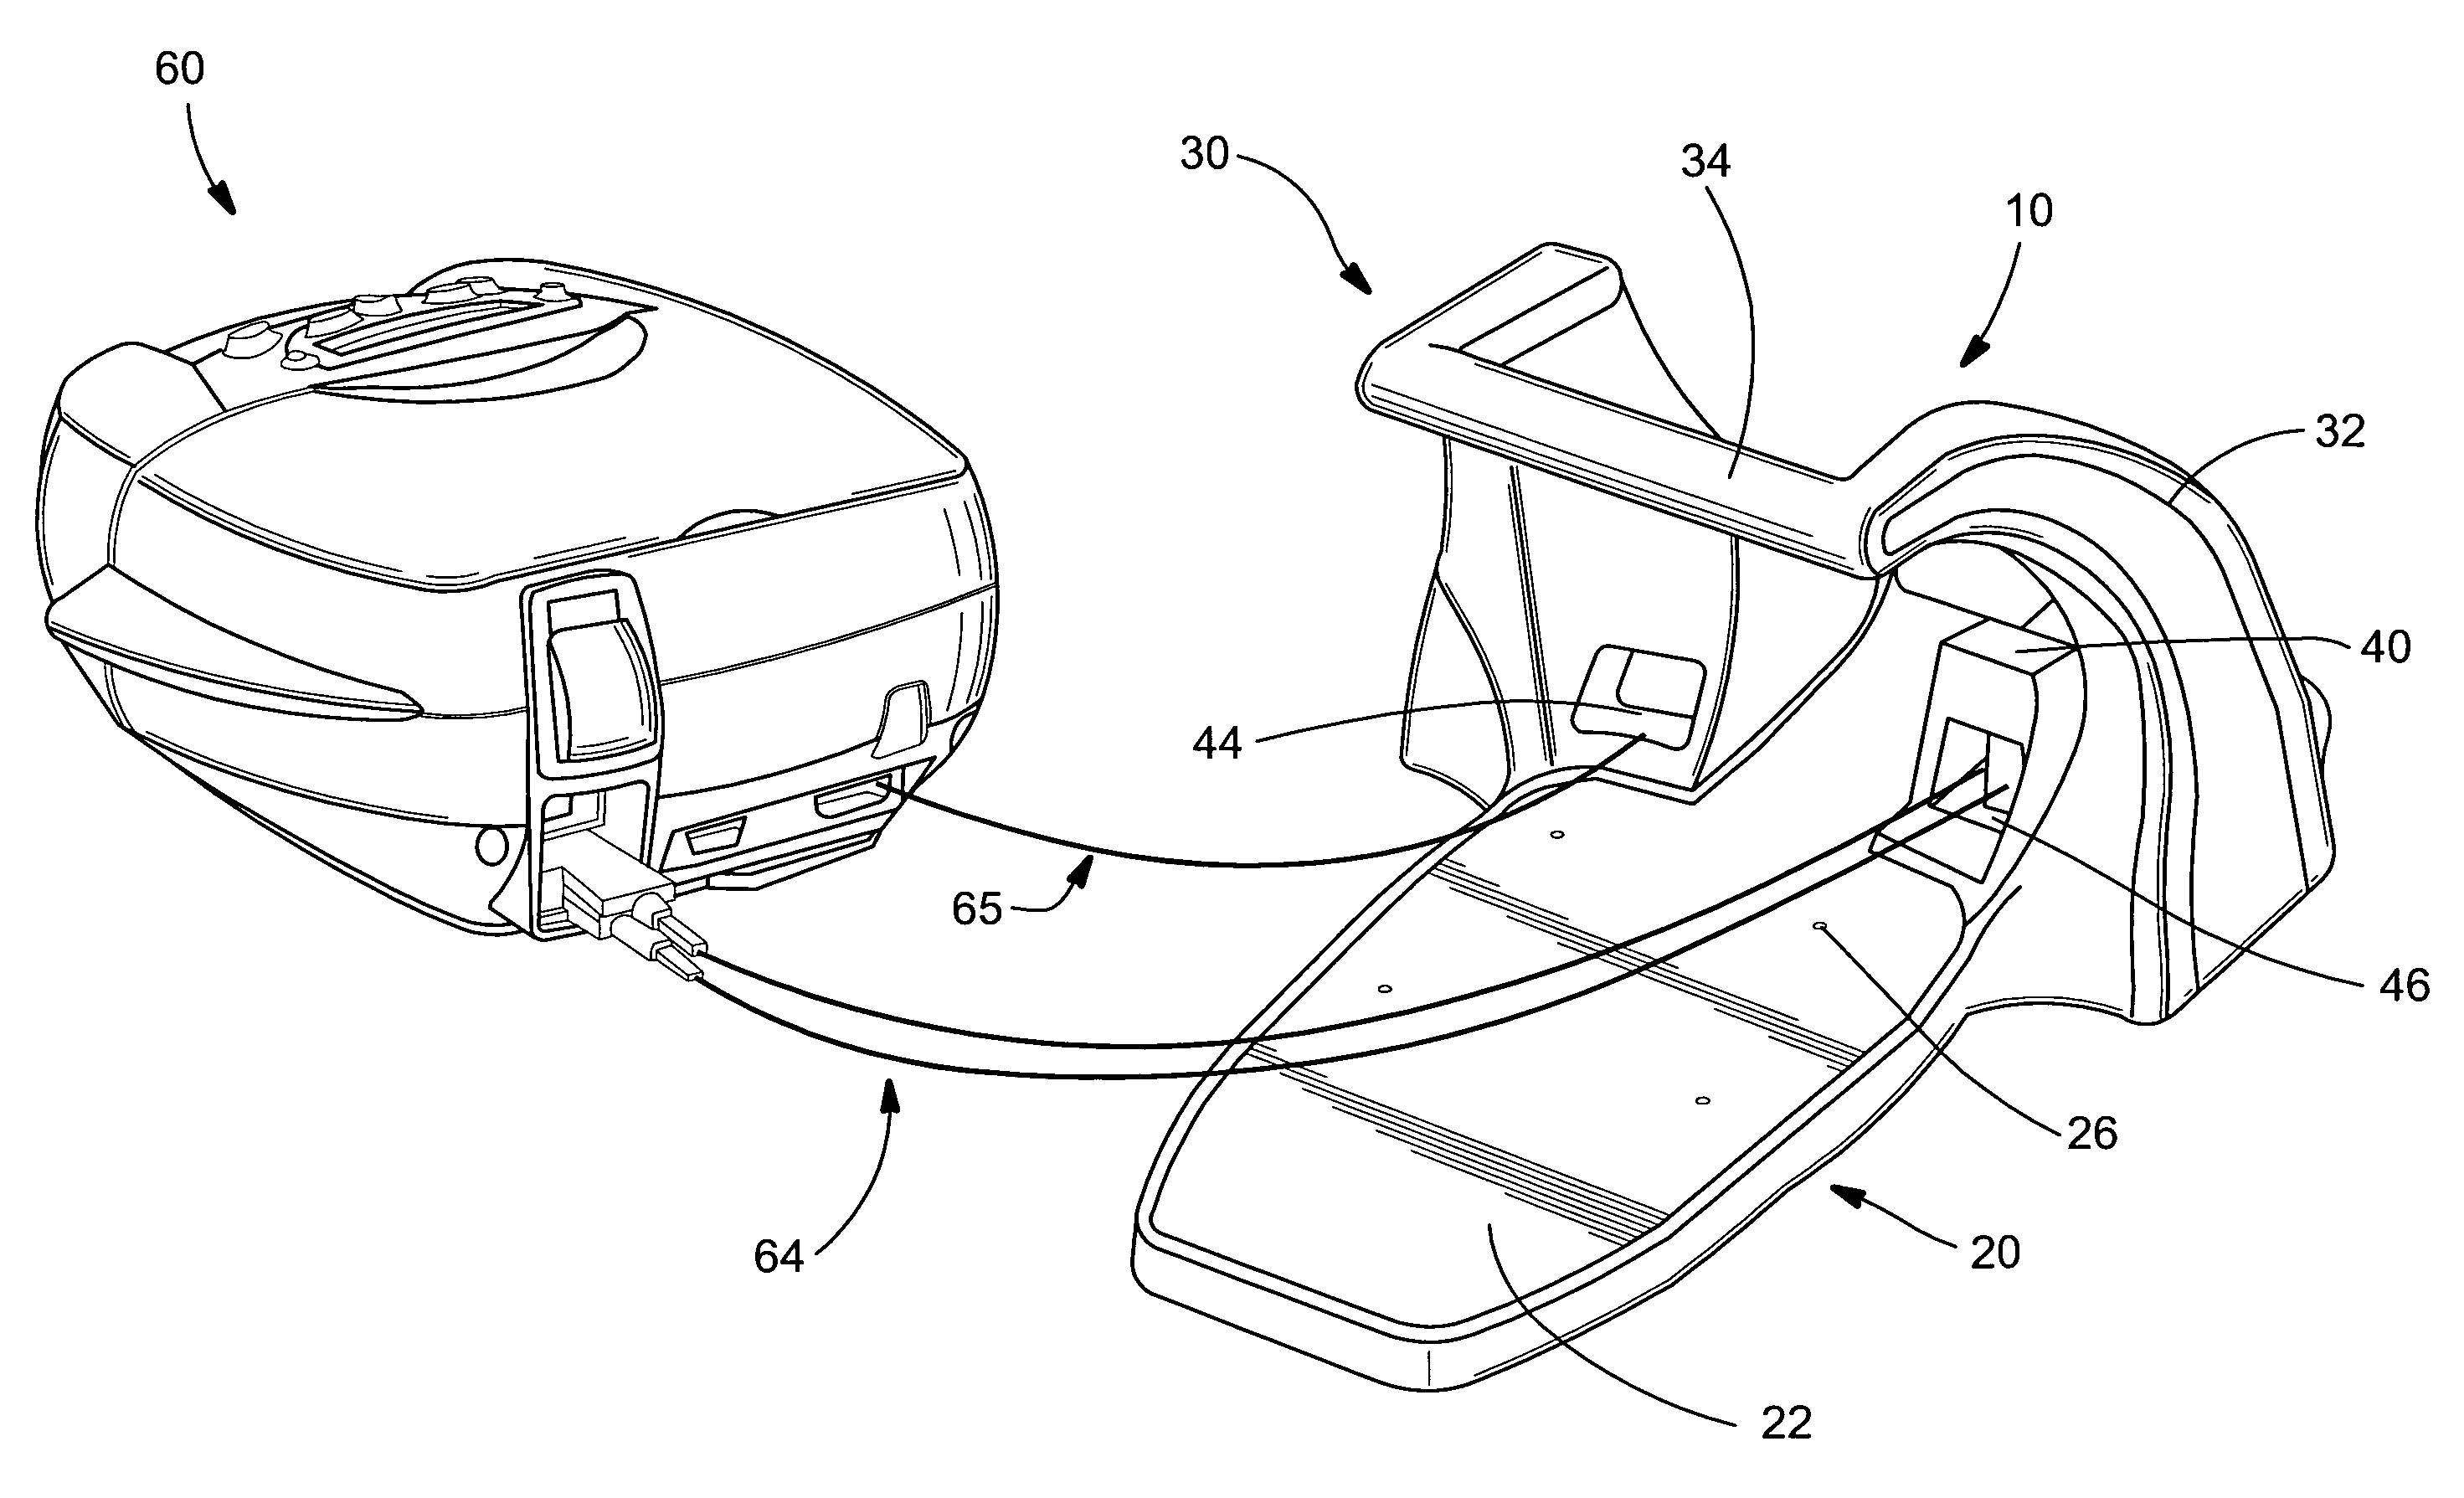 Portable positive airway pressure device accessories and methods for use thereof